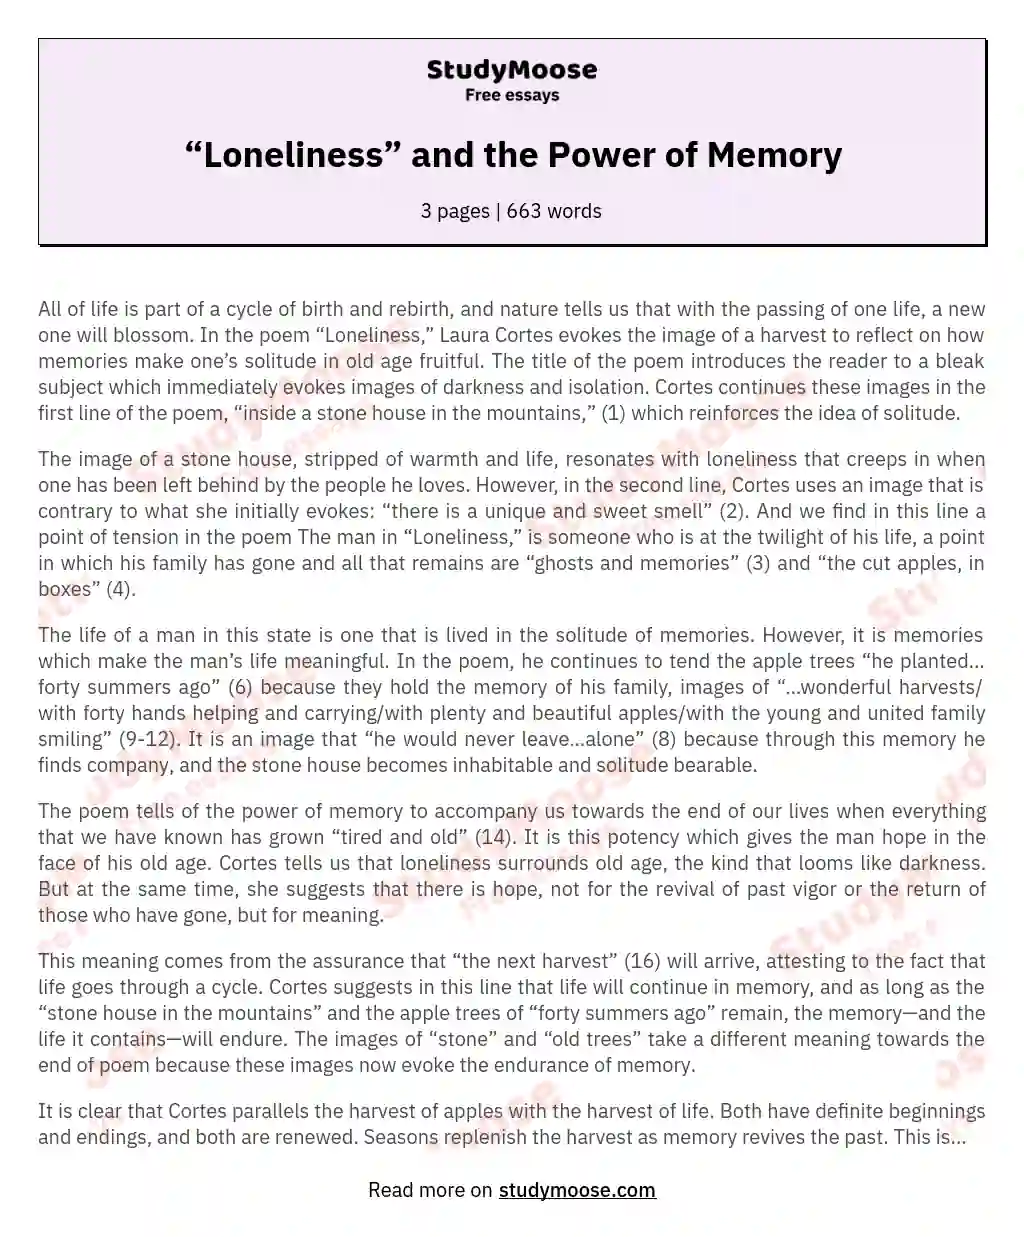 “Loneliness” and the Power of Memory